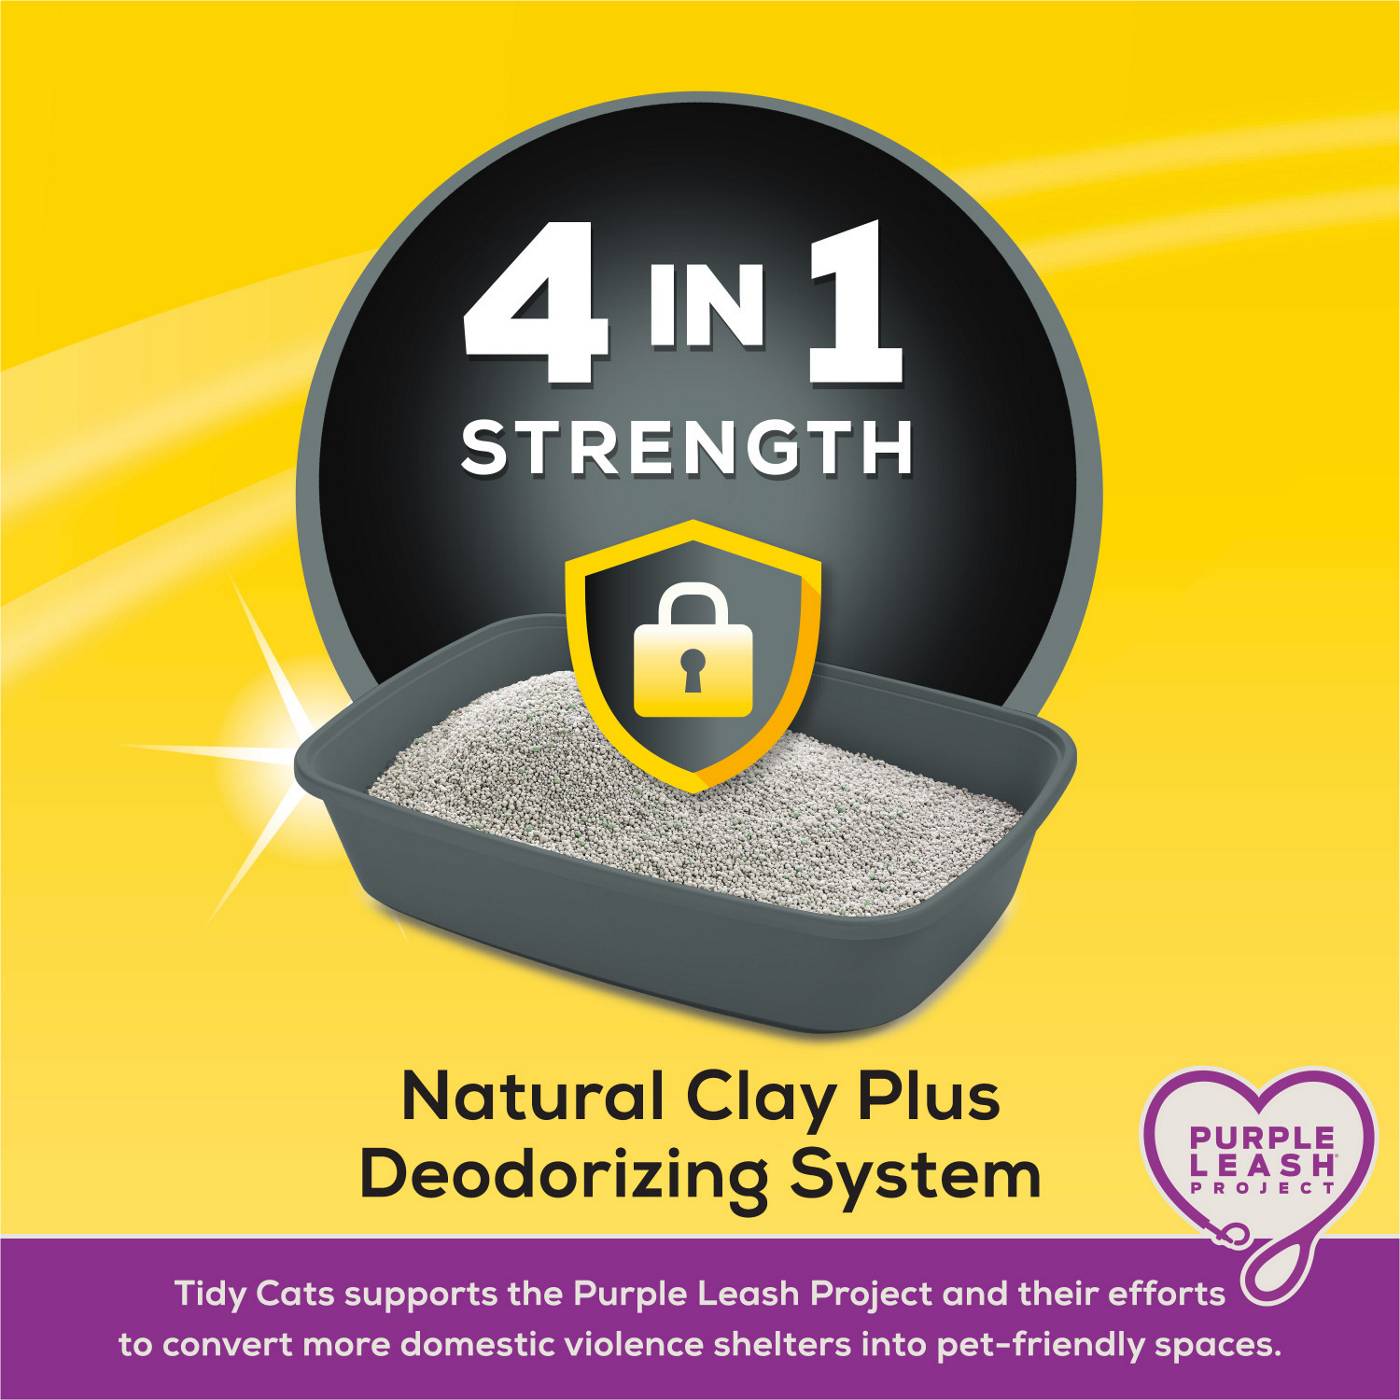 Tidy Cats Purina Tidy Cats Clumping Cat Litter, 4-in-1 Strength Multi Cat Litter; image 5 of 6